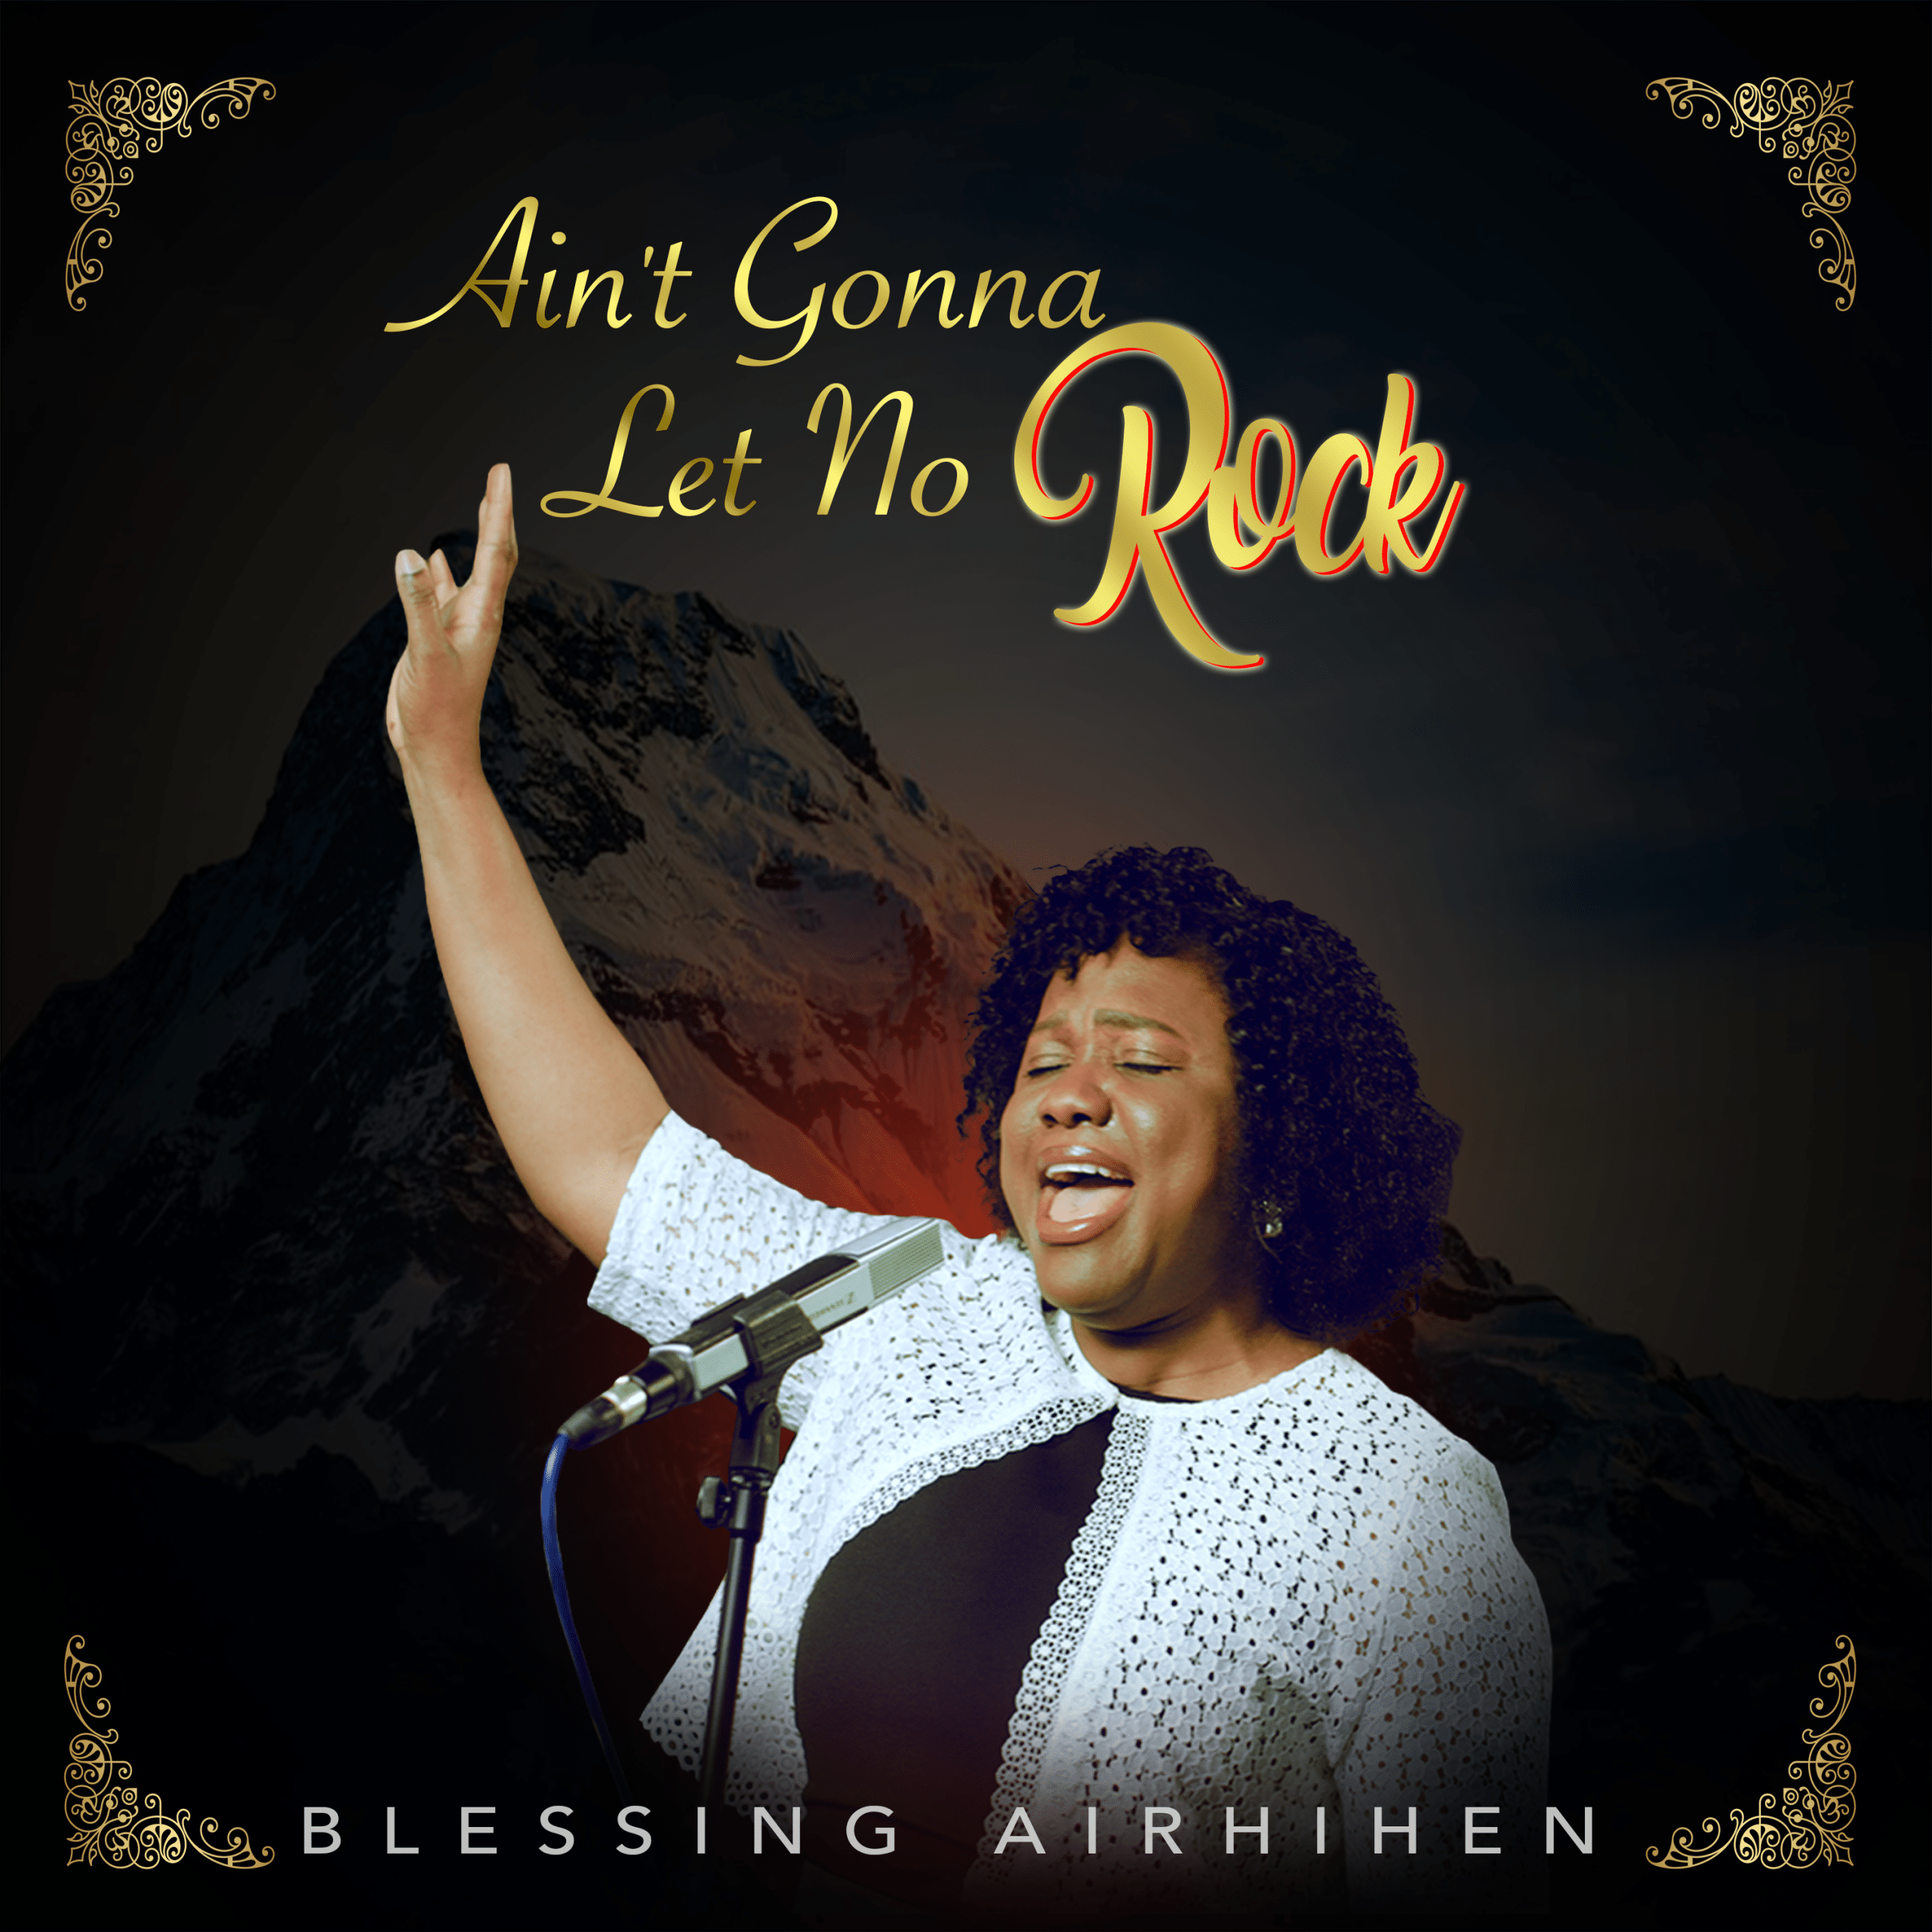 Ain’t Gonna Let No Rock by Blessing Airhihen